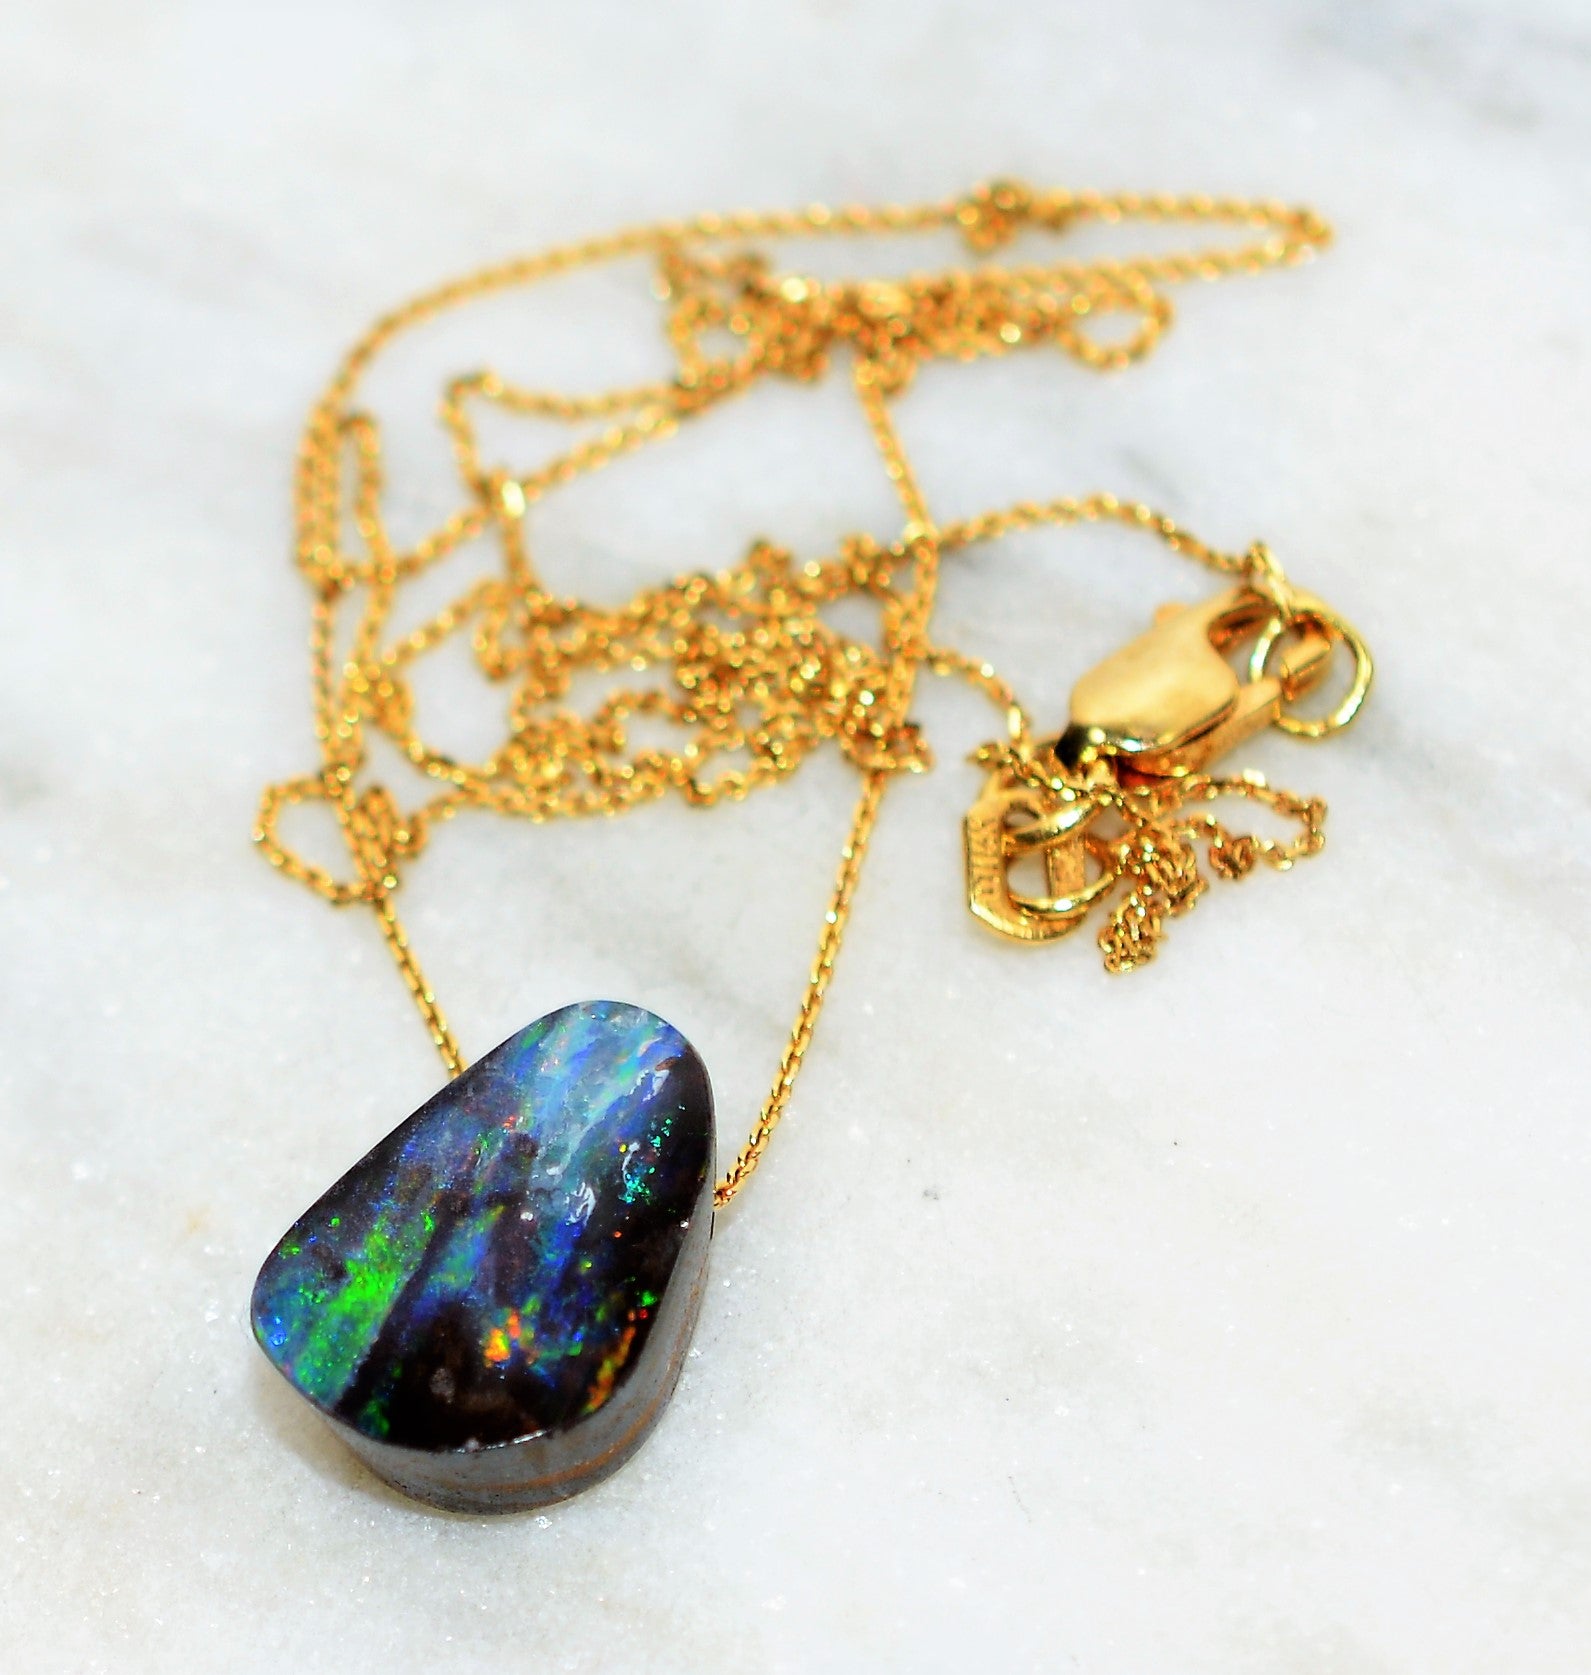 Natural Australian Boulder Opal Necklace 14K Solid Gold 9.93ct Pendant Necklace October Birthstone Necklace Fine Jewelry Women's Necklace